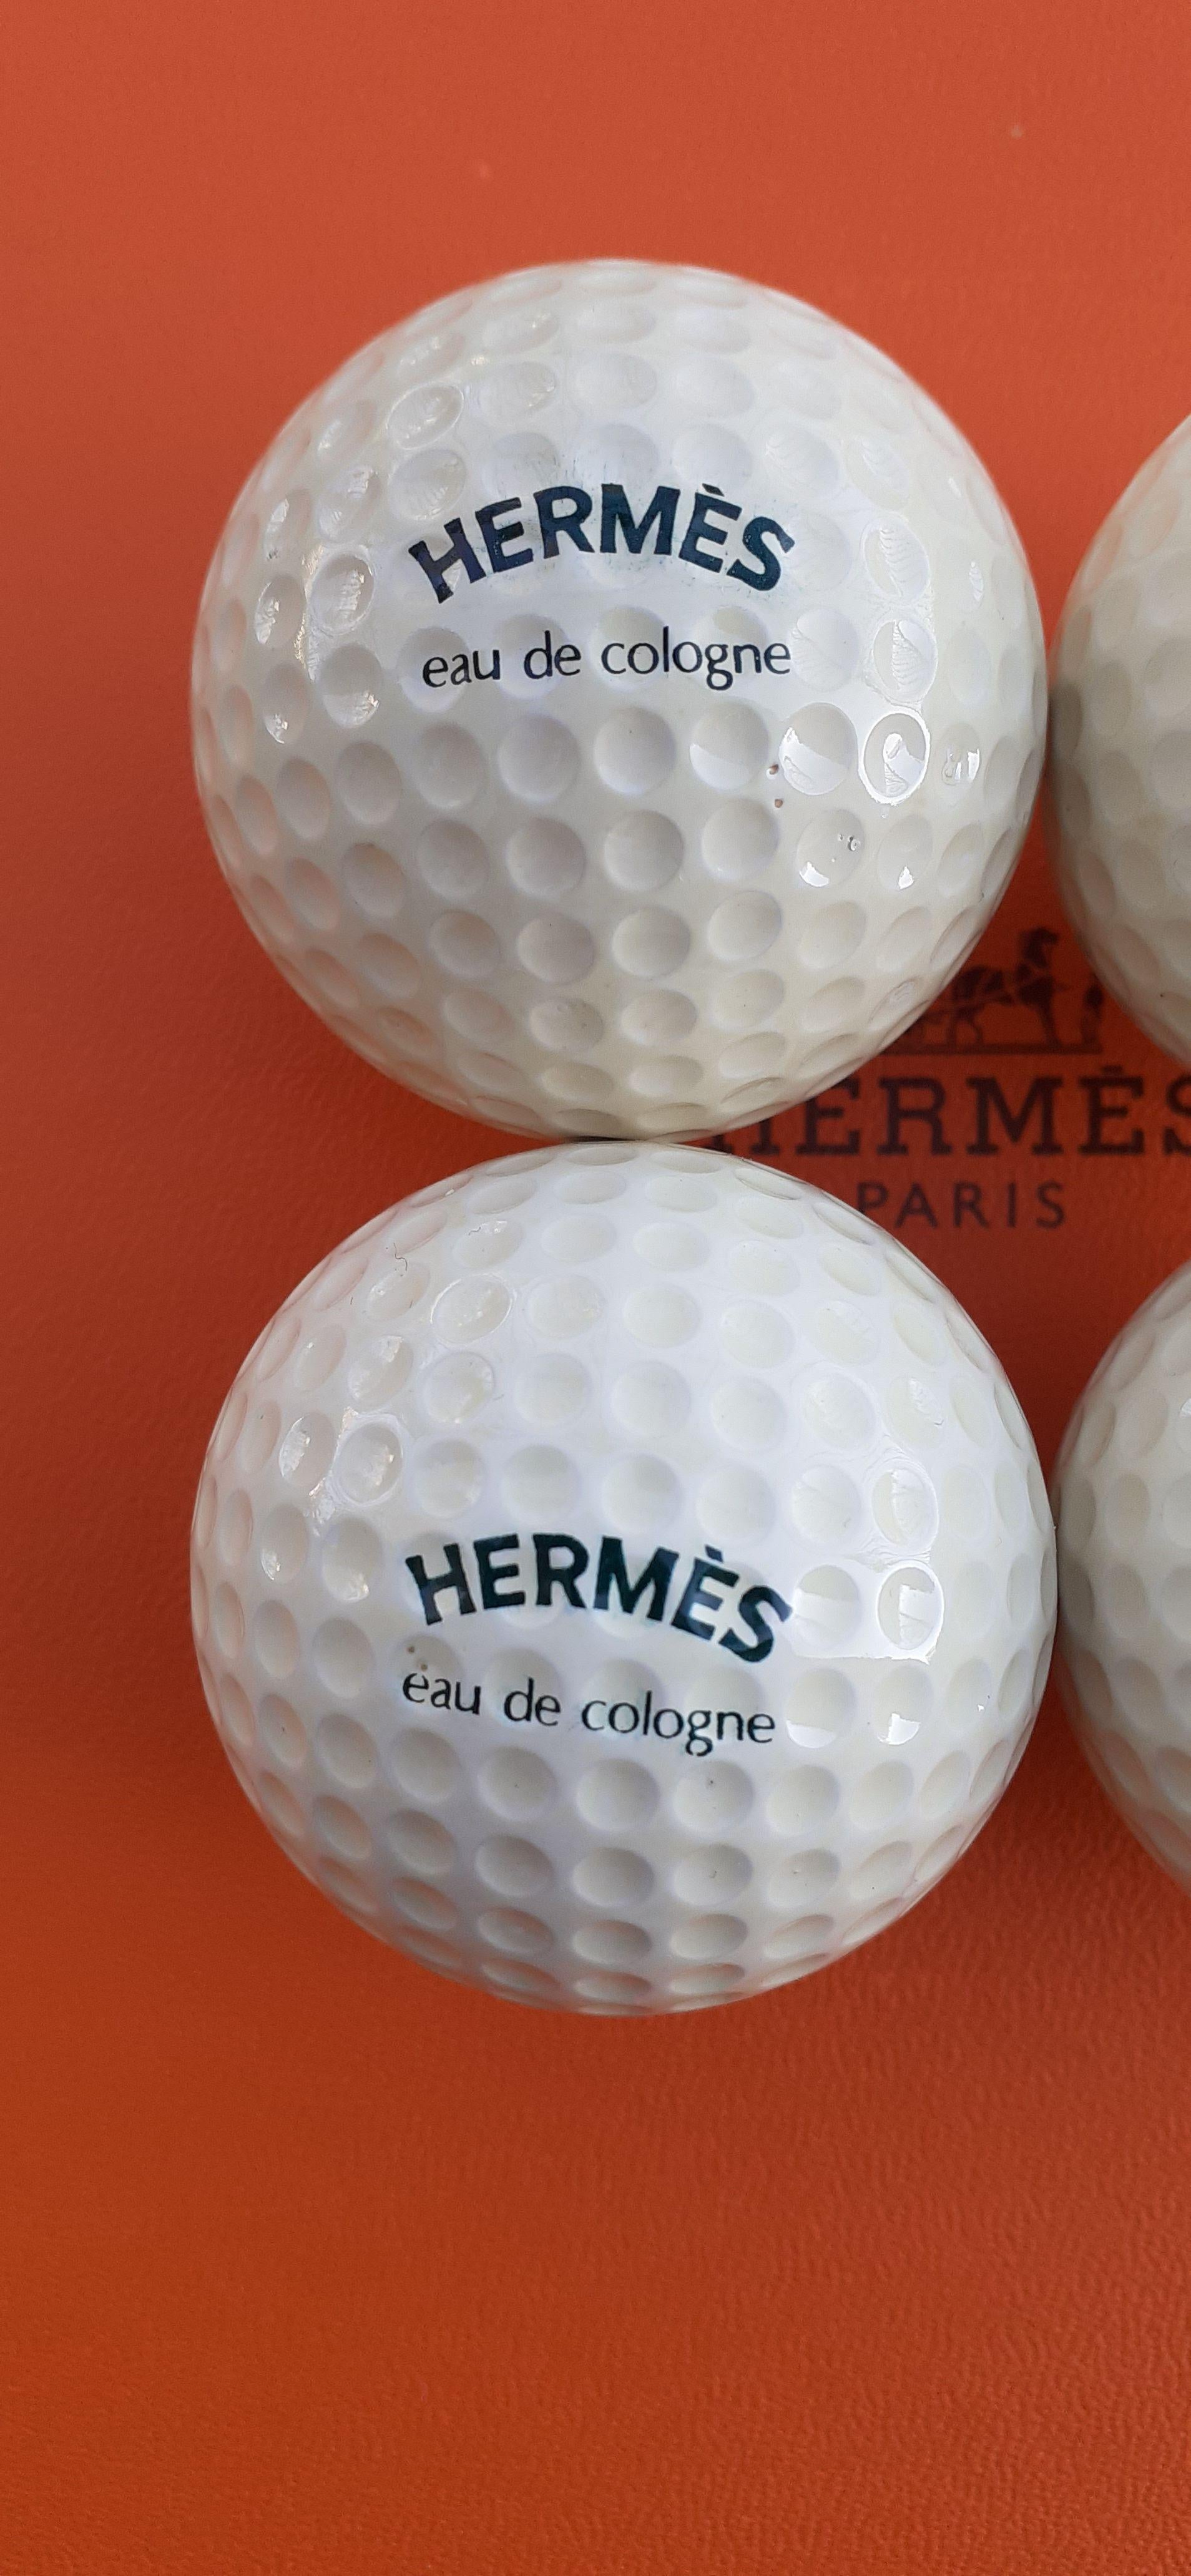 Super Rare Authentic Hermès Golf Balls

Set of 4 balls

Real golf balls meeting the standards

Hermès has produced several sports items under the image of its “eau de cologne” collection, including backpacks and fanny packs.

